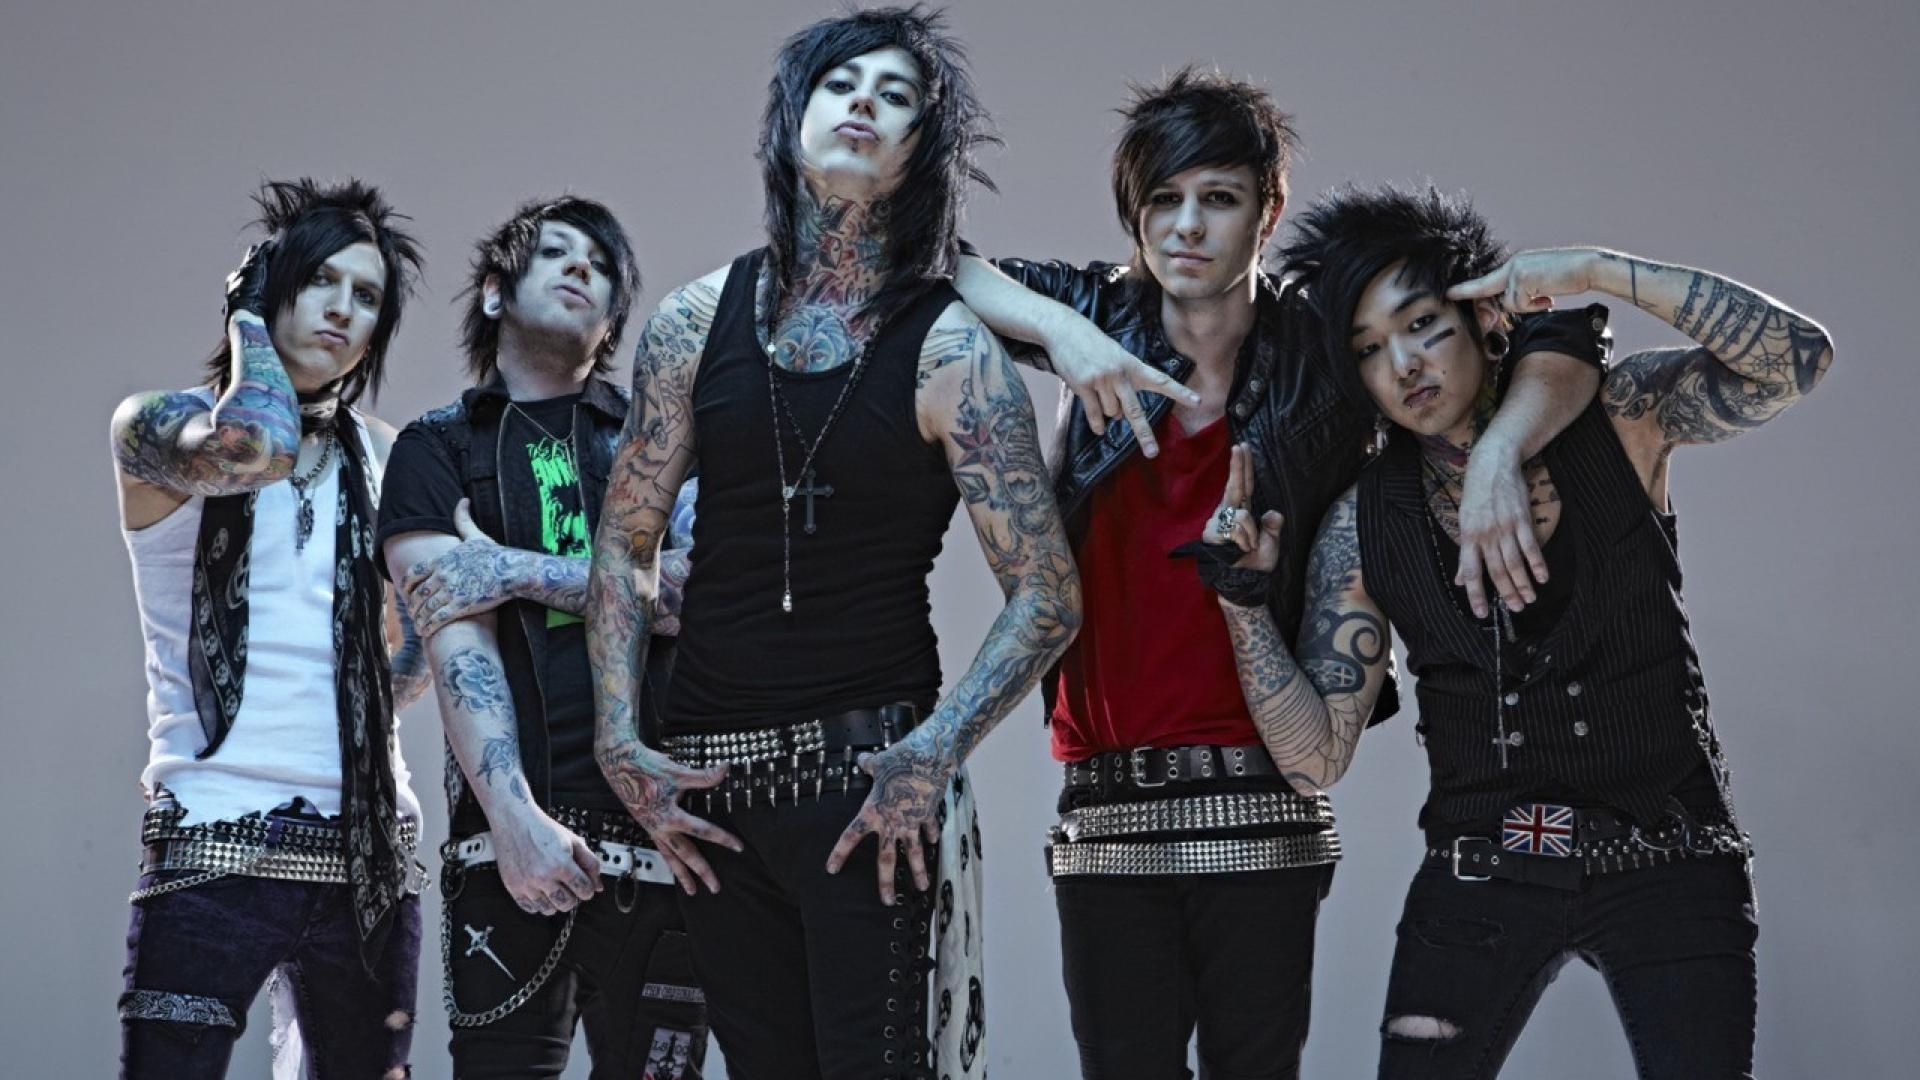 Ronnie Radke wallpapers, Falling In Reverse, Band images, Music band, 1920x1080 Full HD Desktop